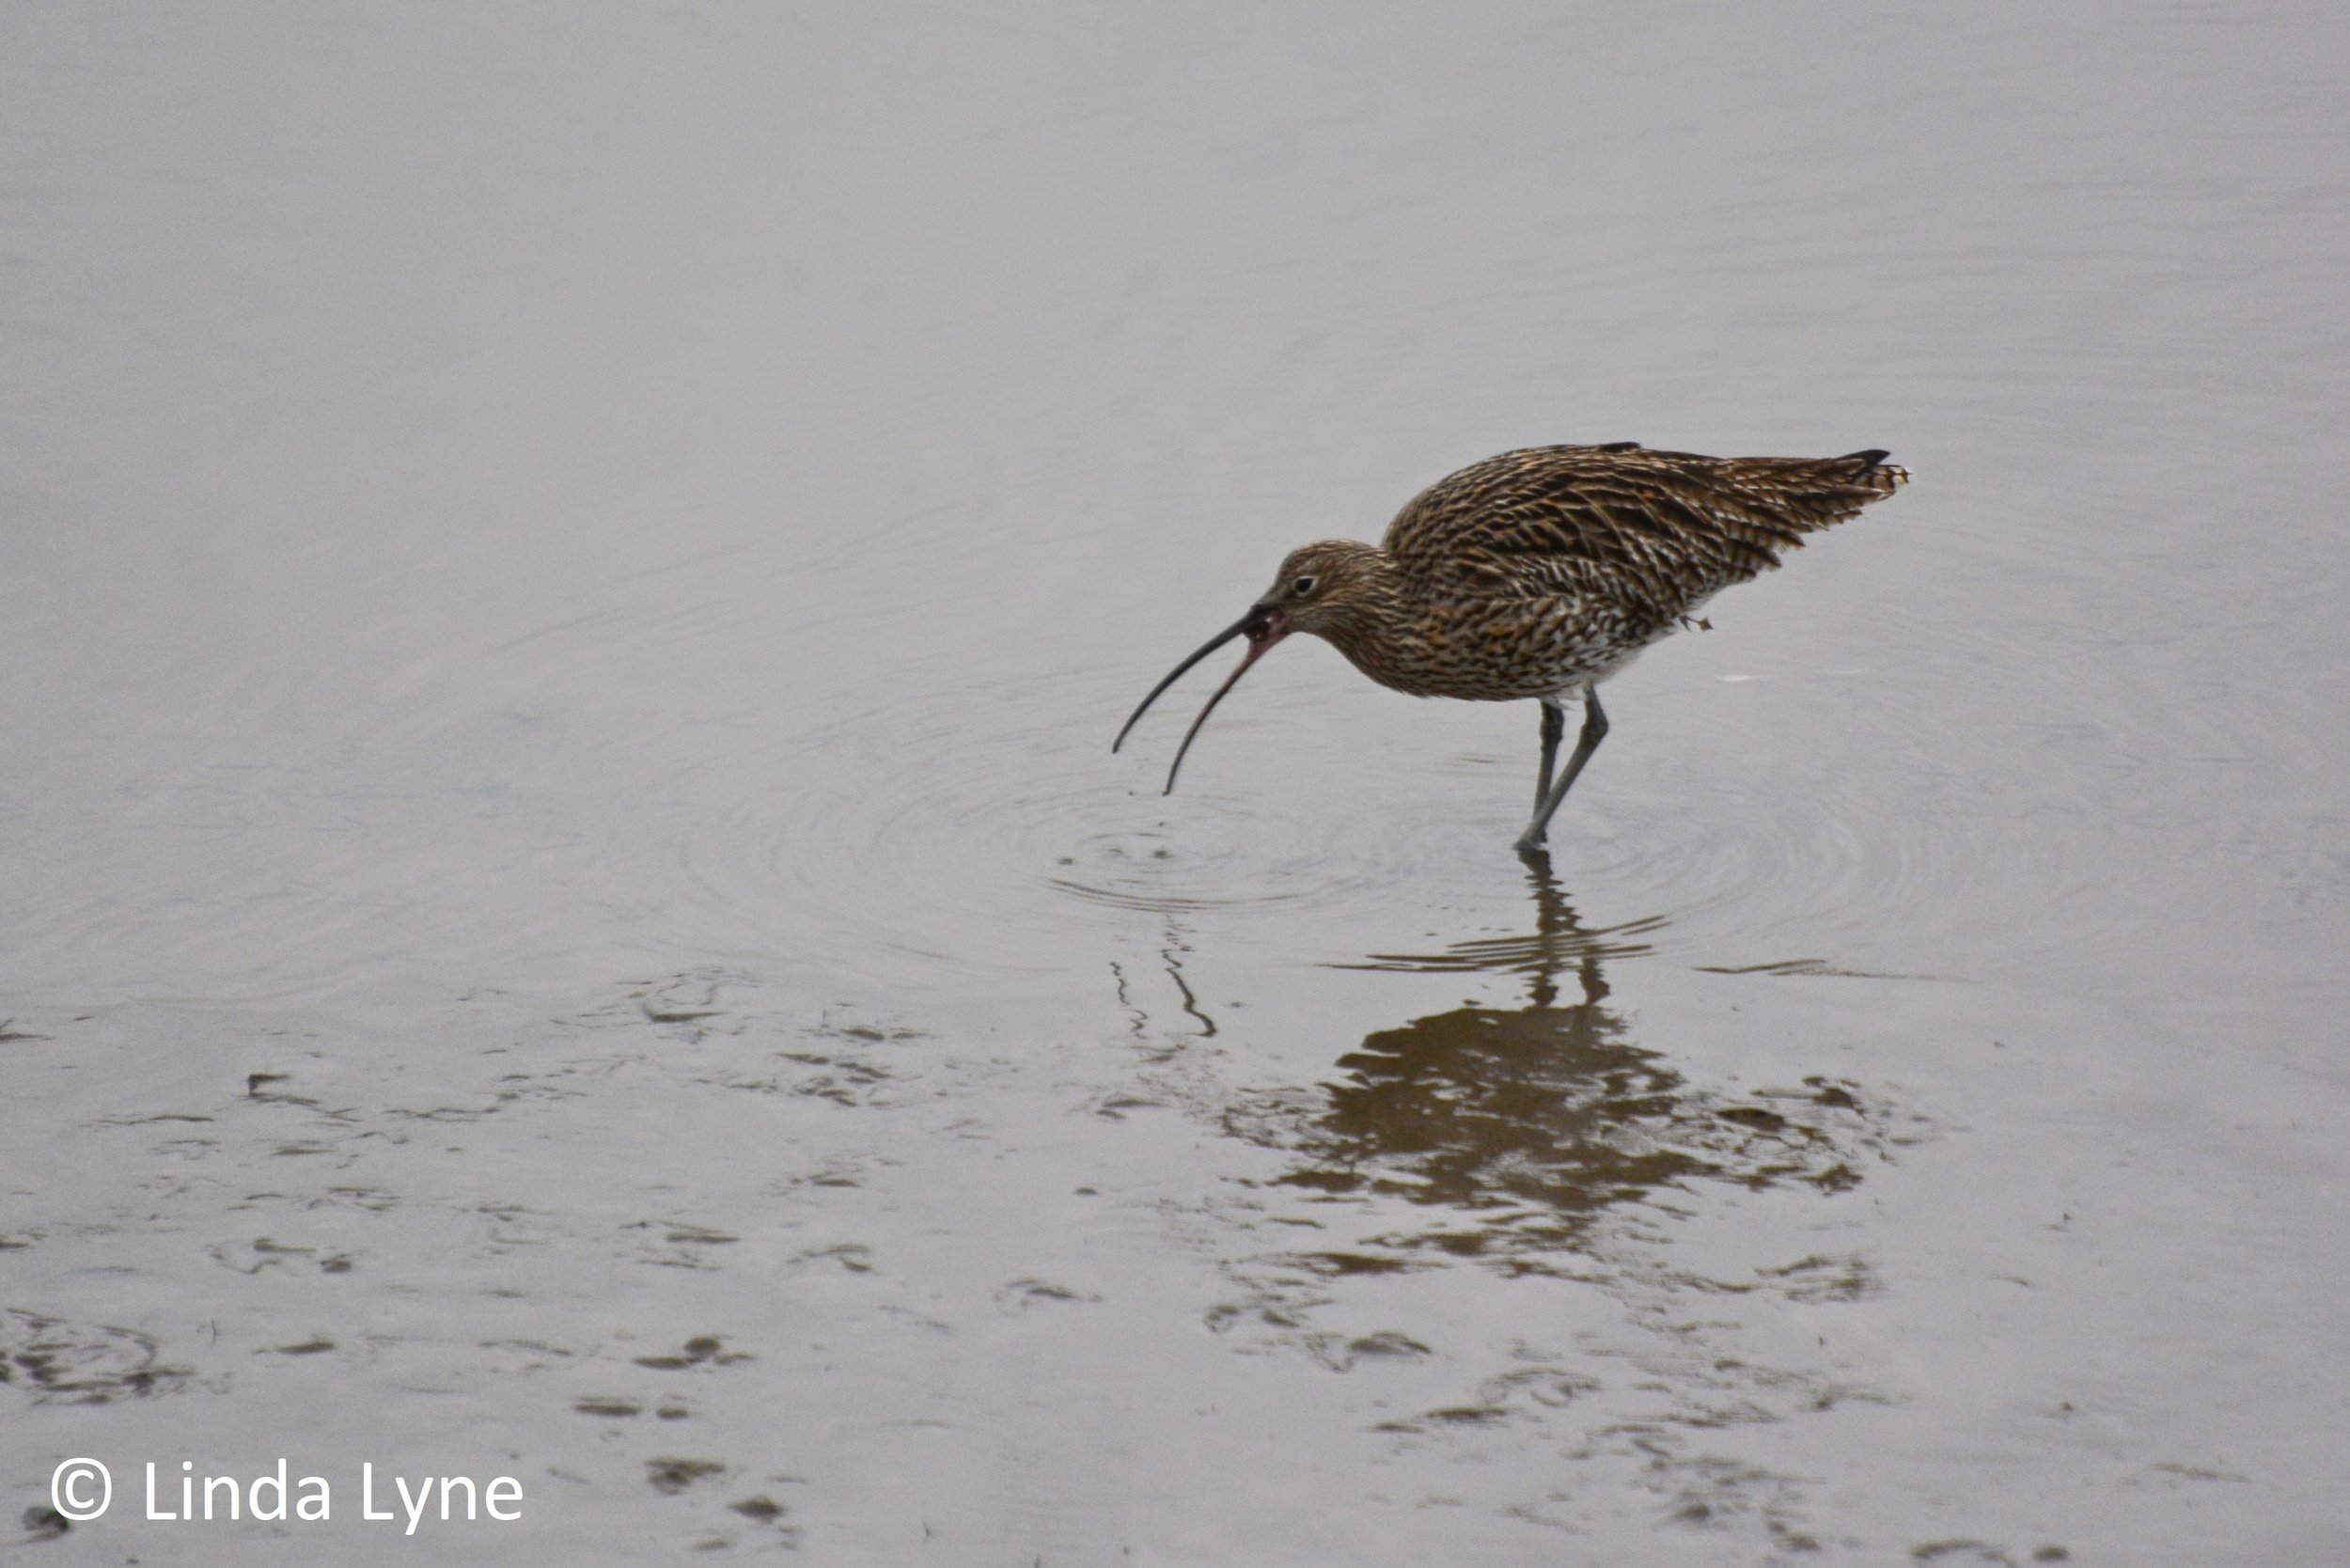 2a_Curlew with food in bill. Photo credit Linda Lyne.jpg